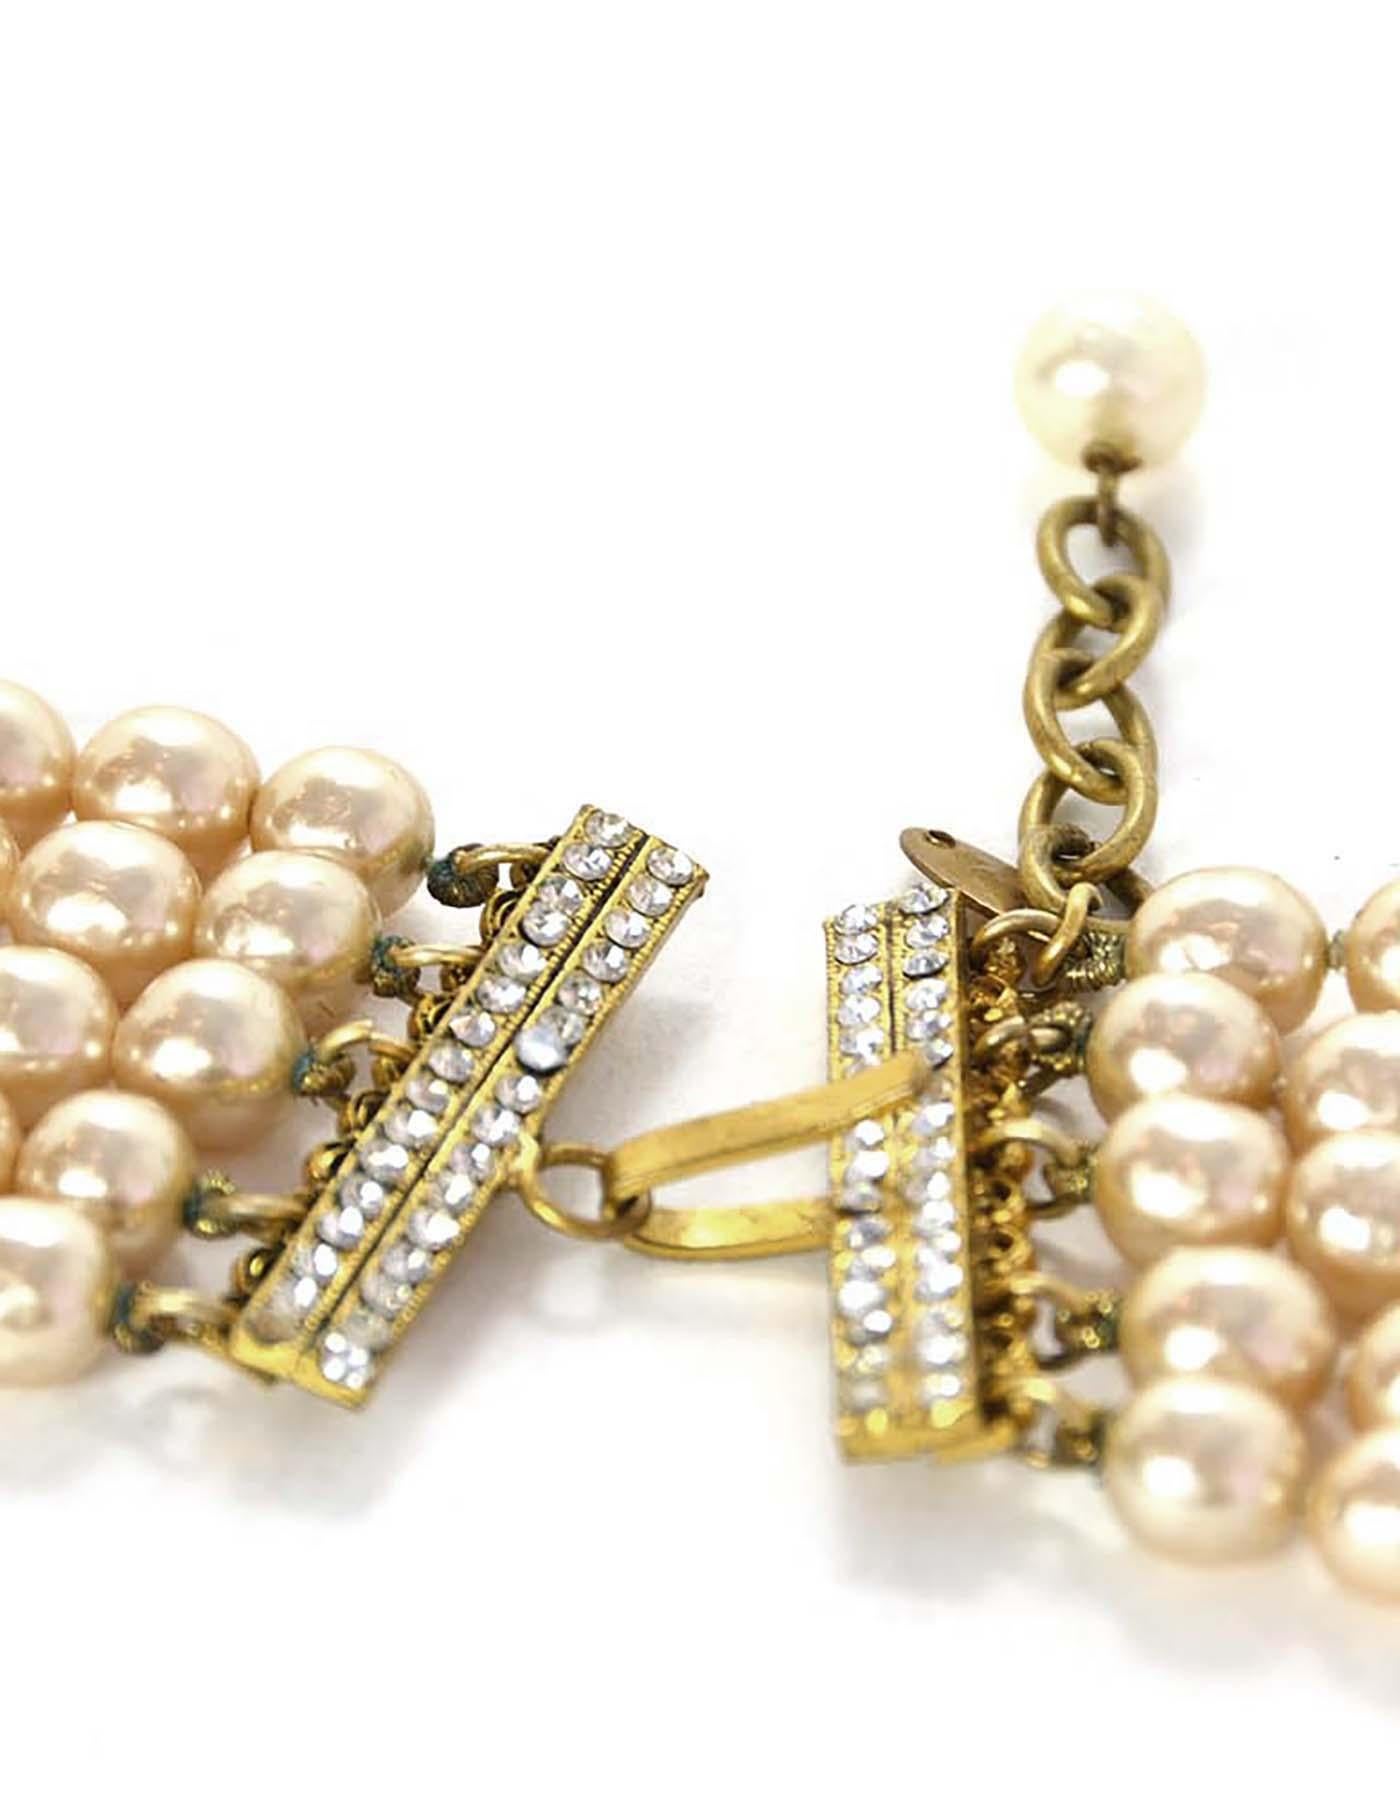 Chanel Vintage 1990s Multi-Strand Faux Pearl & Crystal Rondelle Necklace For Sale 2